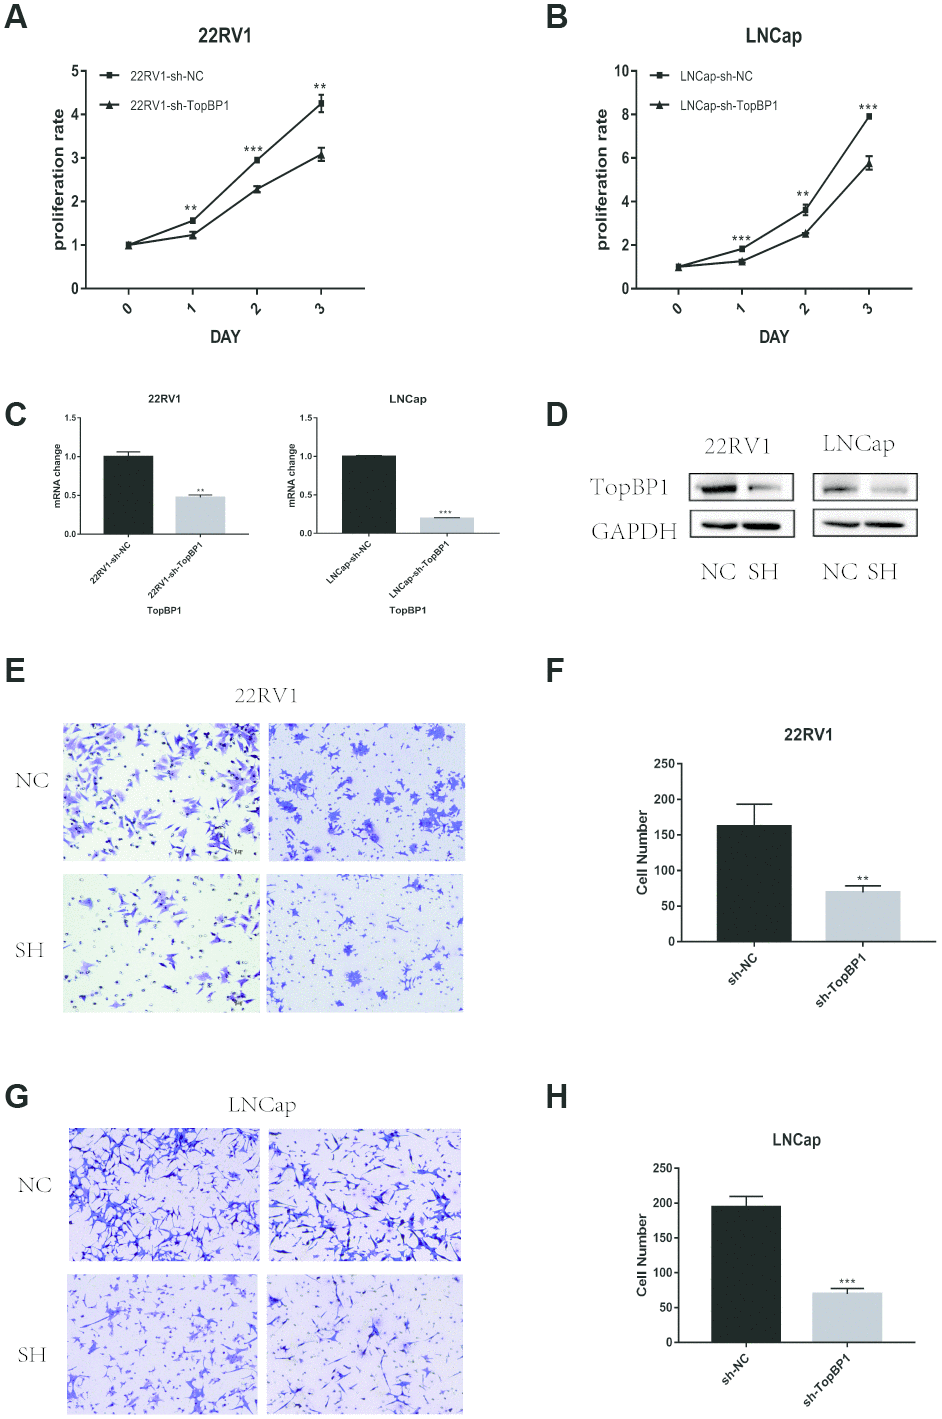 Down-regulation of TopBP1 significantly suppressed the proliferation of both 22RV1 (A) and LNCaP (B, C) qRT-PCR was performed to detect alteration of the TopBP1 expression. (D) Western blotting was performed to detect alteration of TopBP1. (E–H) Down-regulation of TopBP1 suppresses the migration of prostate cancer. (E, G) Represented images of two separated experiments in each cell line are showed. The data presented are mean ± SD for three independent experiments. **P